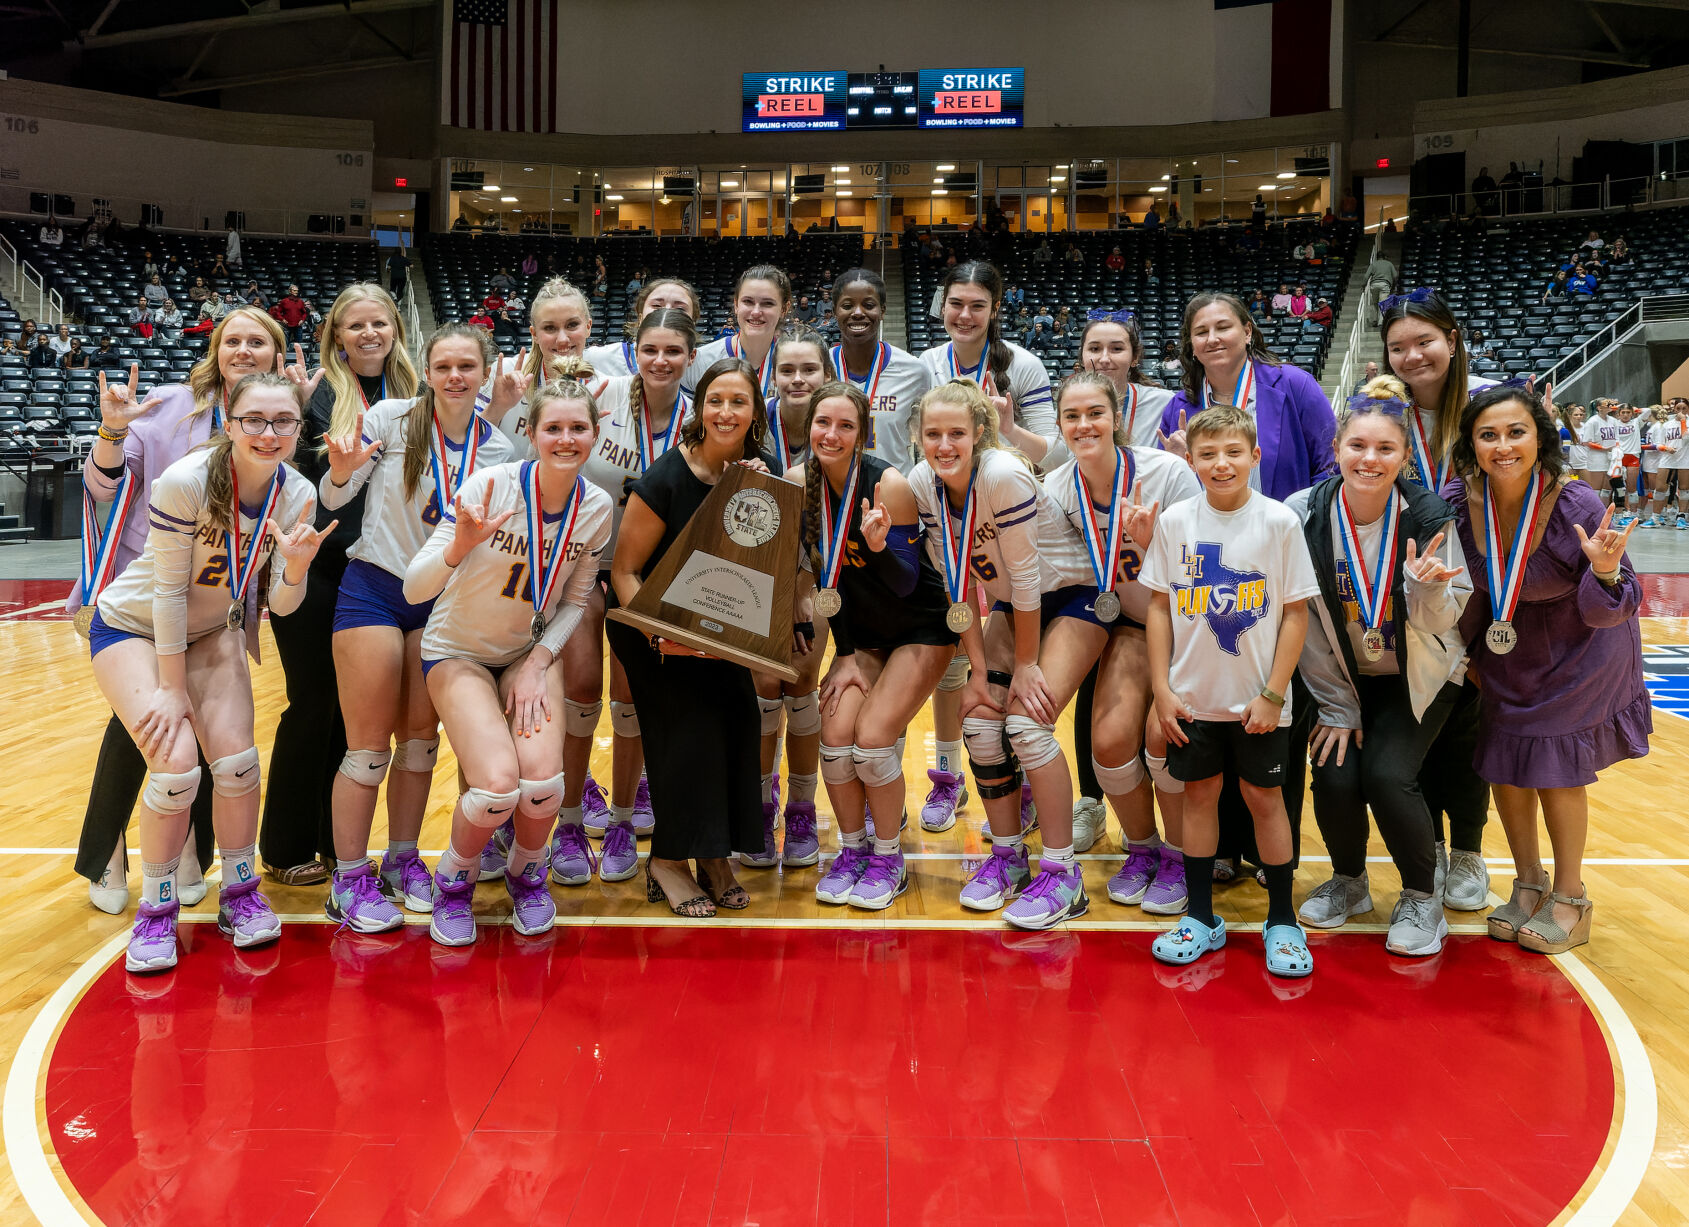 Lovejoy Claims Victory Over Liberty Hill in Class 5A Championship Match